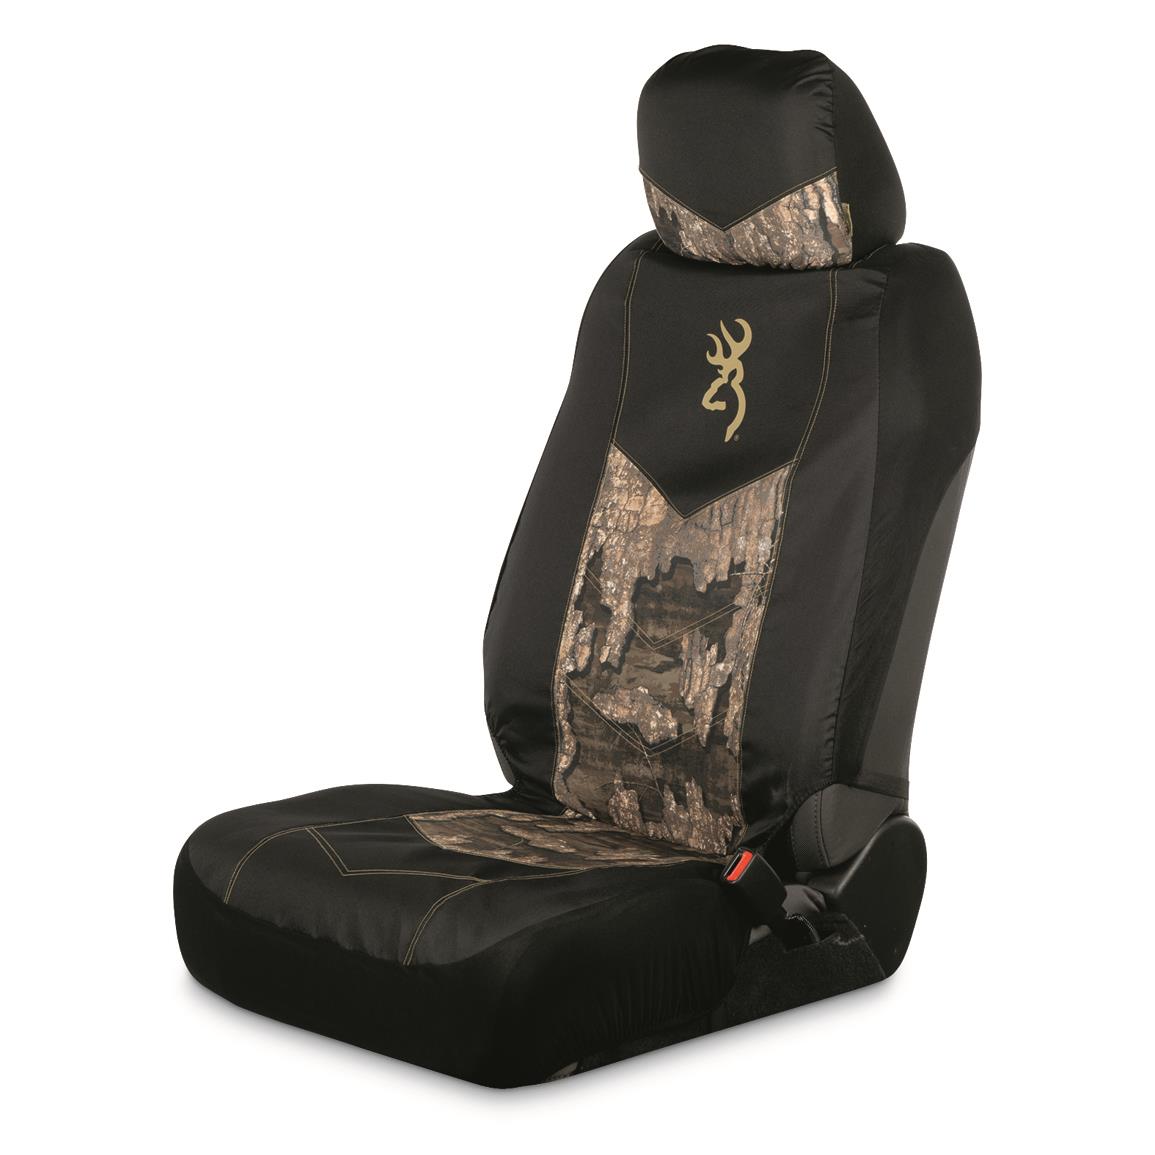 Browning Chevron Realtree Timber Low-back Seat Cover